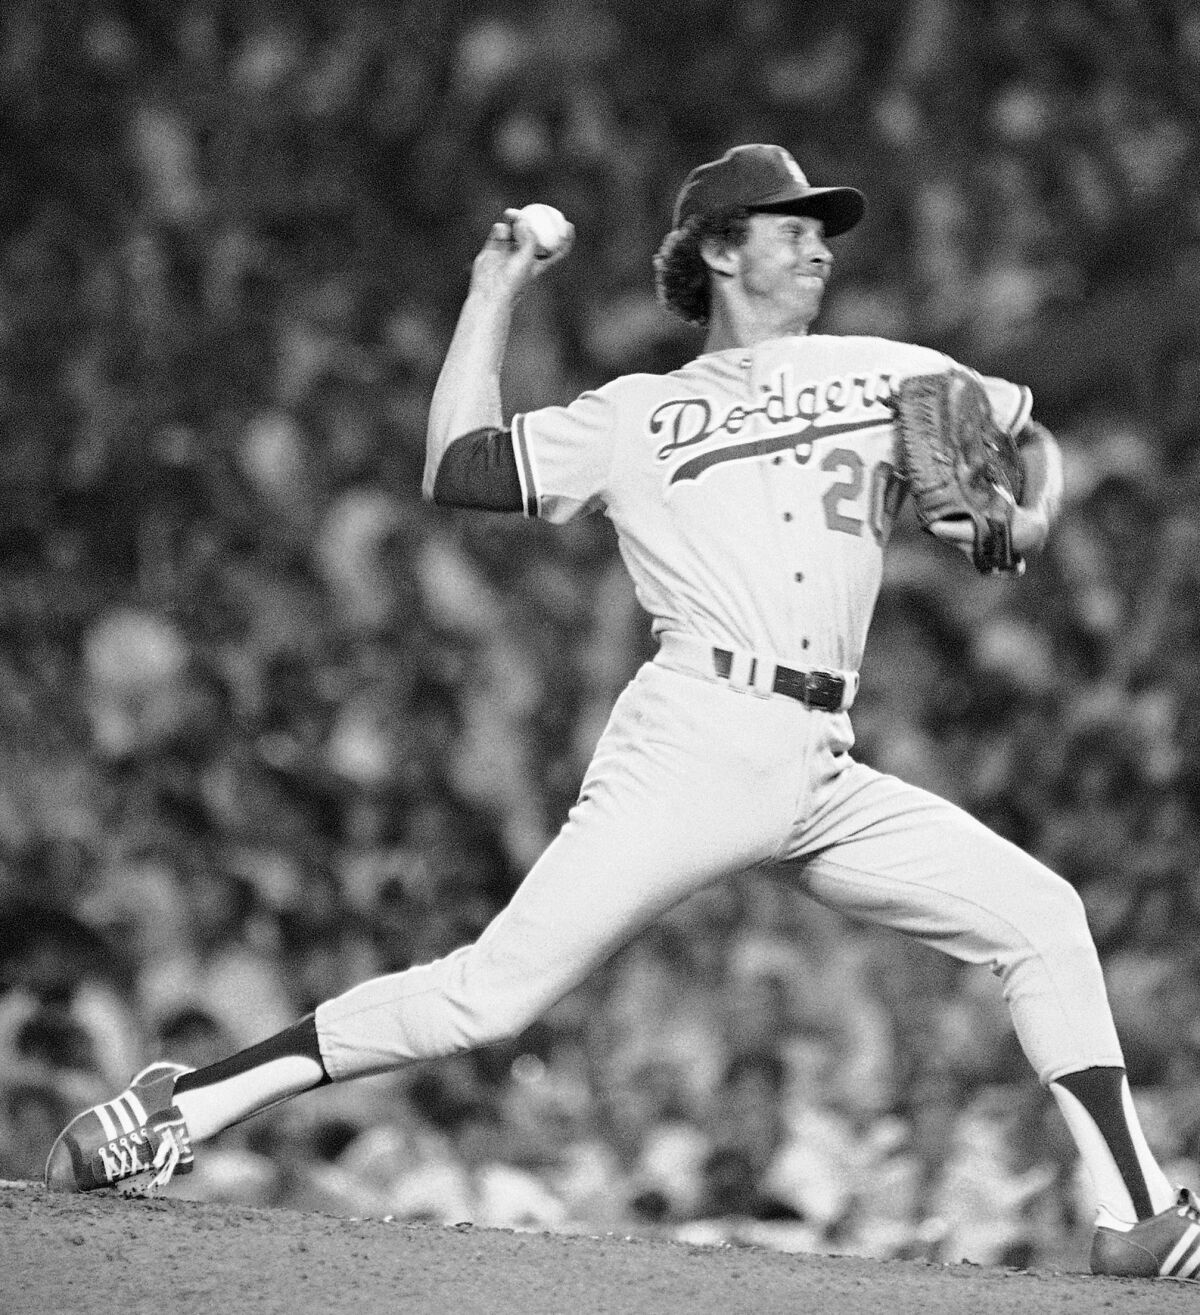 This July 20, 1977, file photo shows American League pitcher Don Sutton of the Los Angeles Dodgers in the 48th All-Star Game